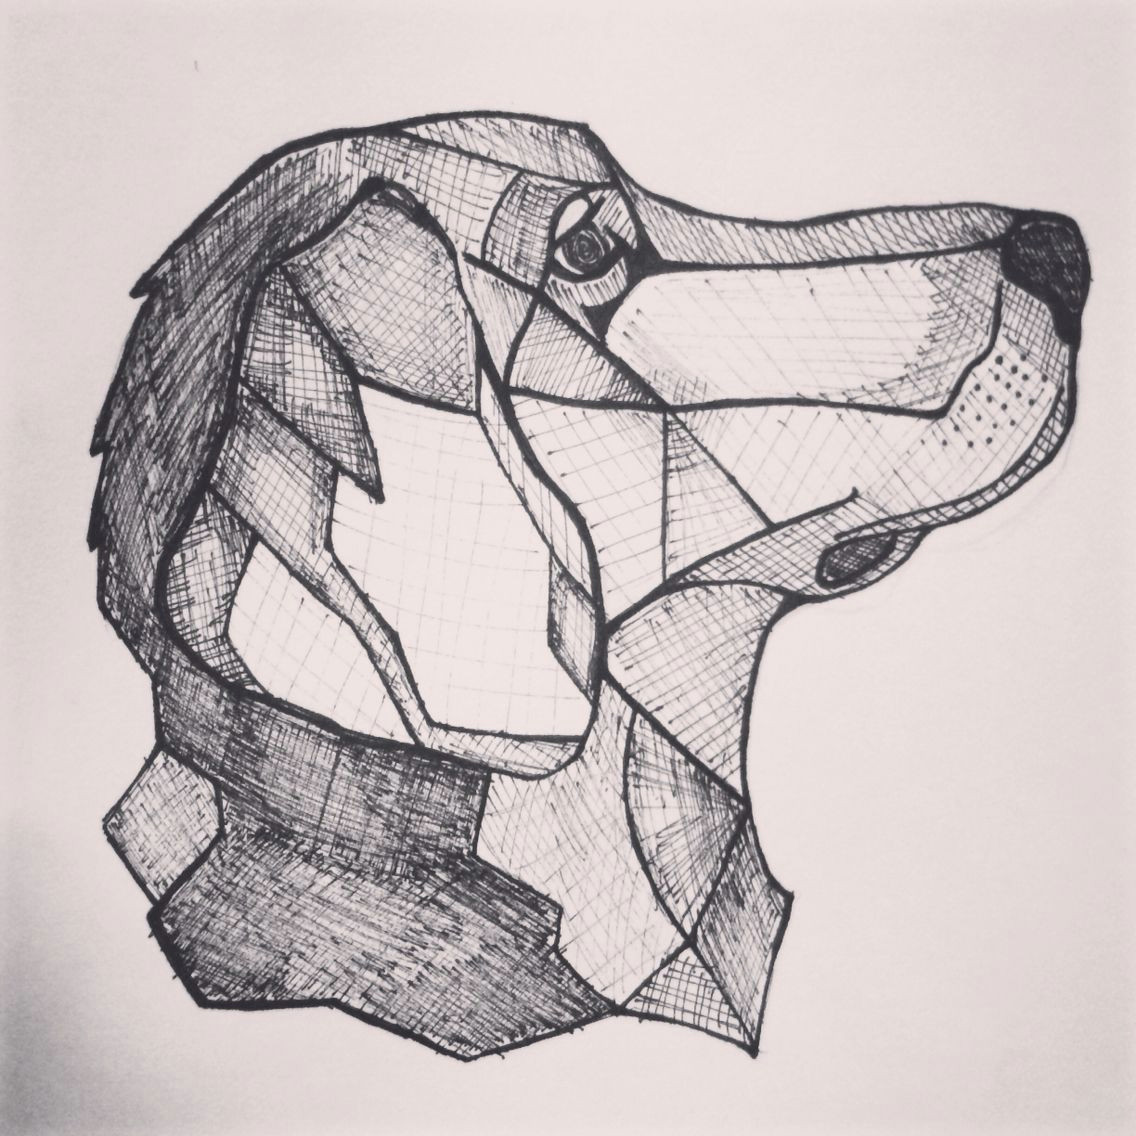 Drawing Dog Tattoo Inspired by A Tattoo I Saw I Decided to Try Drawing My Golden